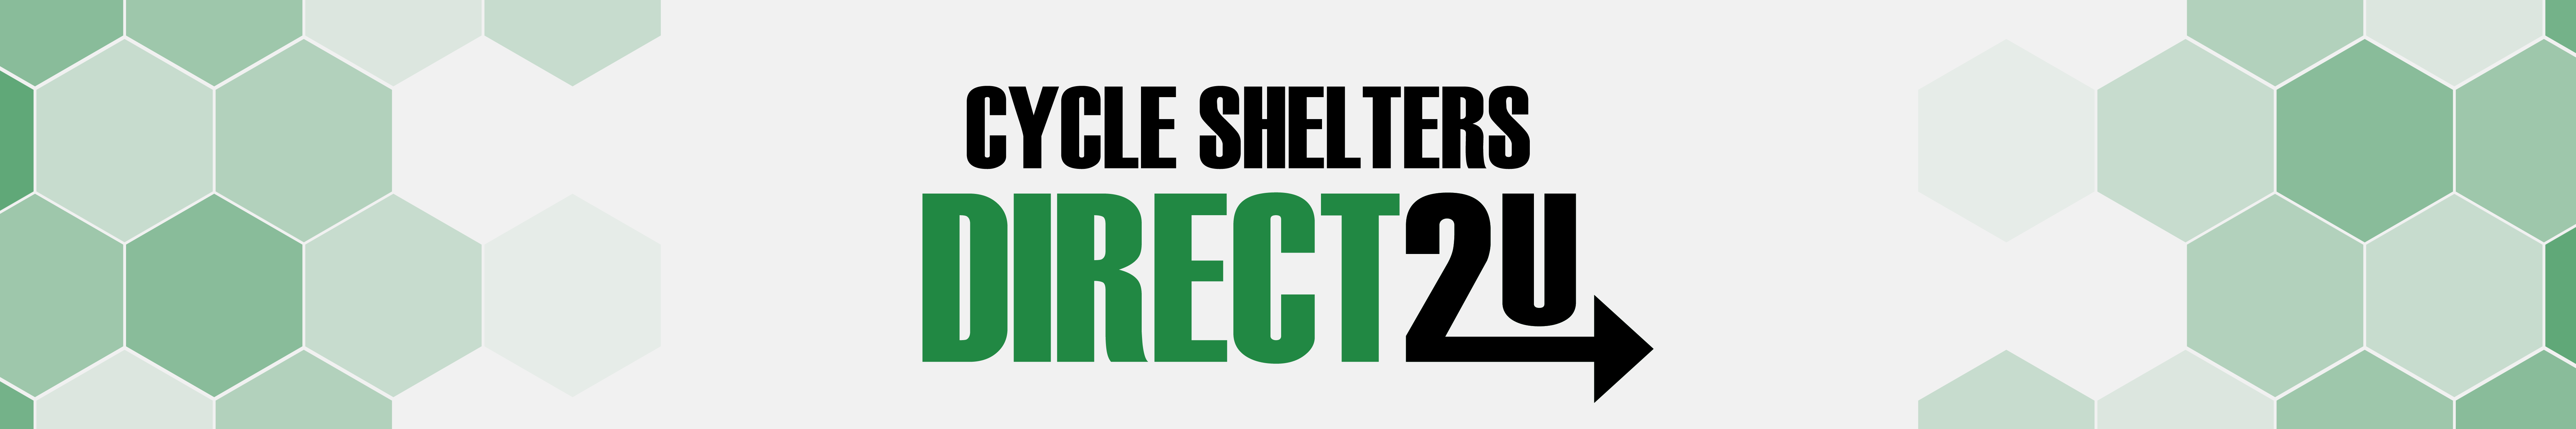 Cycle Shelters Blog